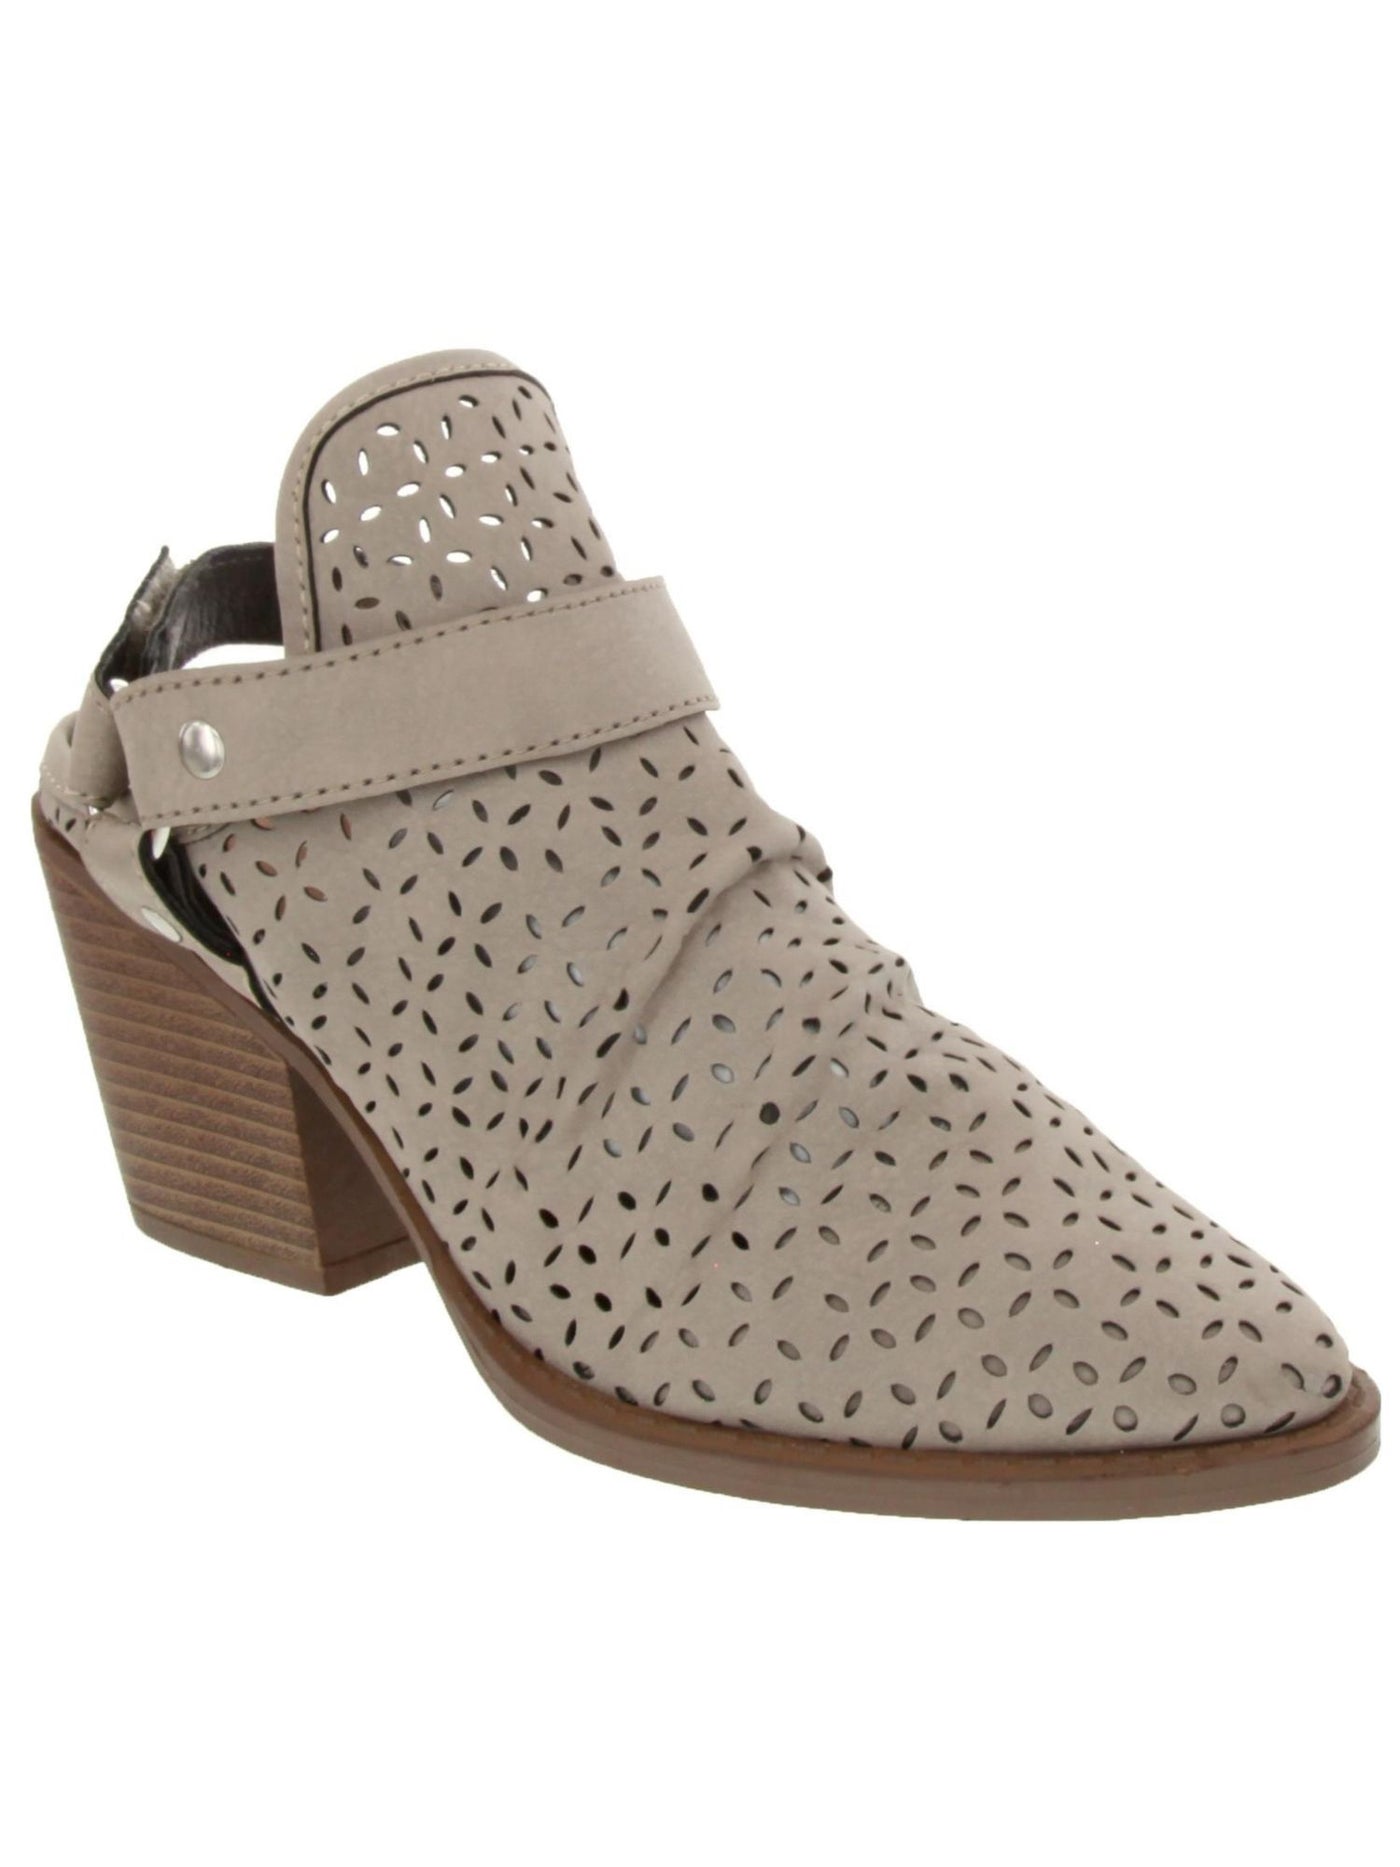 SUGAR Womens Stone Gray Perforated   Flexible Sole Adjustable Strap Breathable Temper Almond Toe Block Heel Booties 7.5